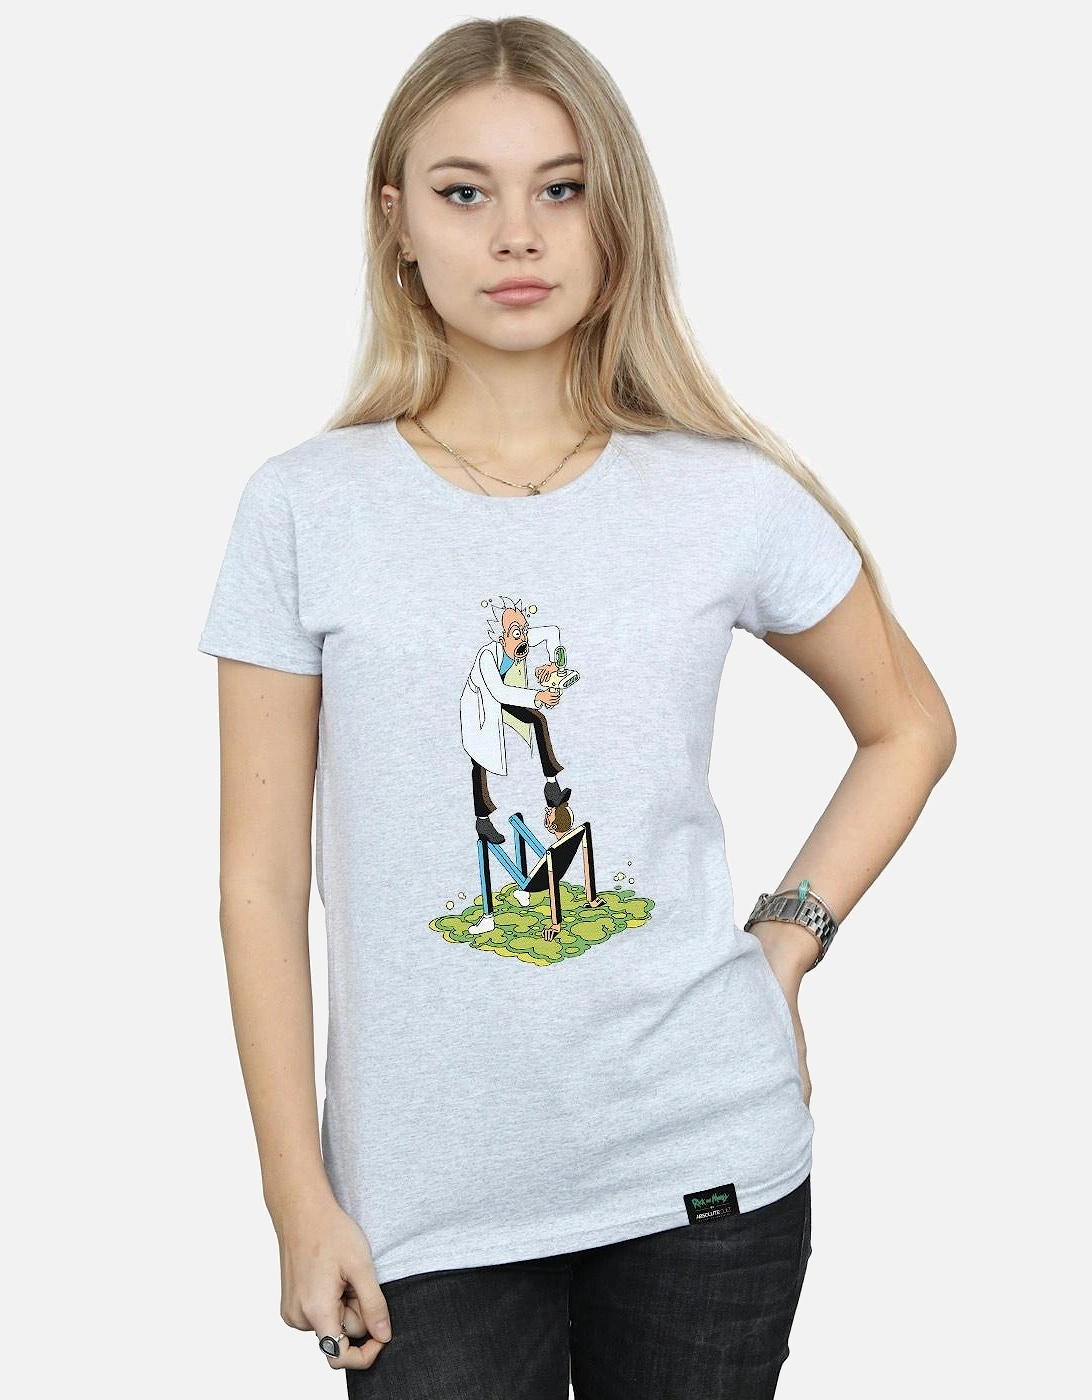 Womens/Ladies Stylised Characters Cotton T-Shirt